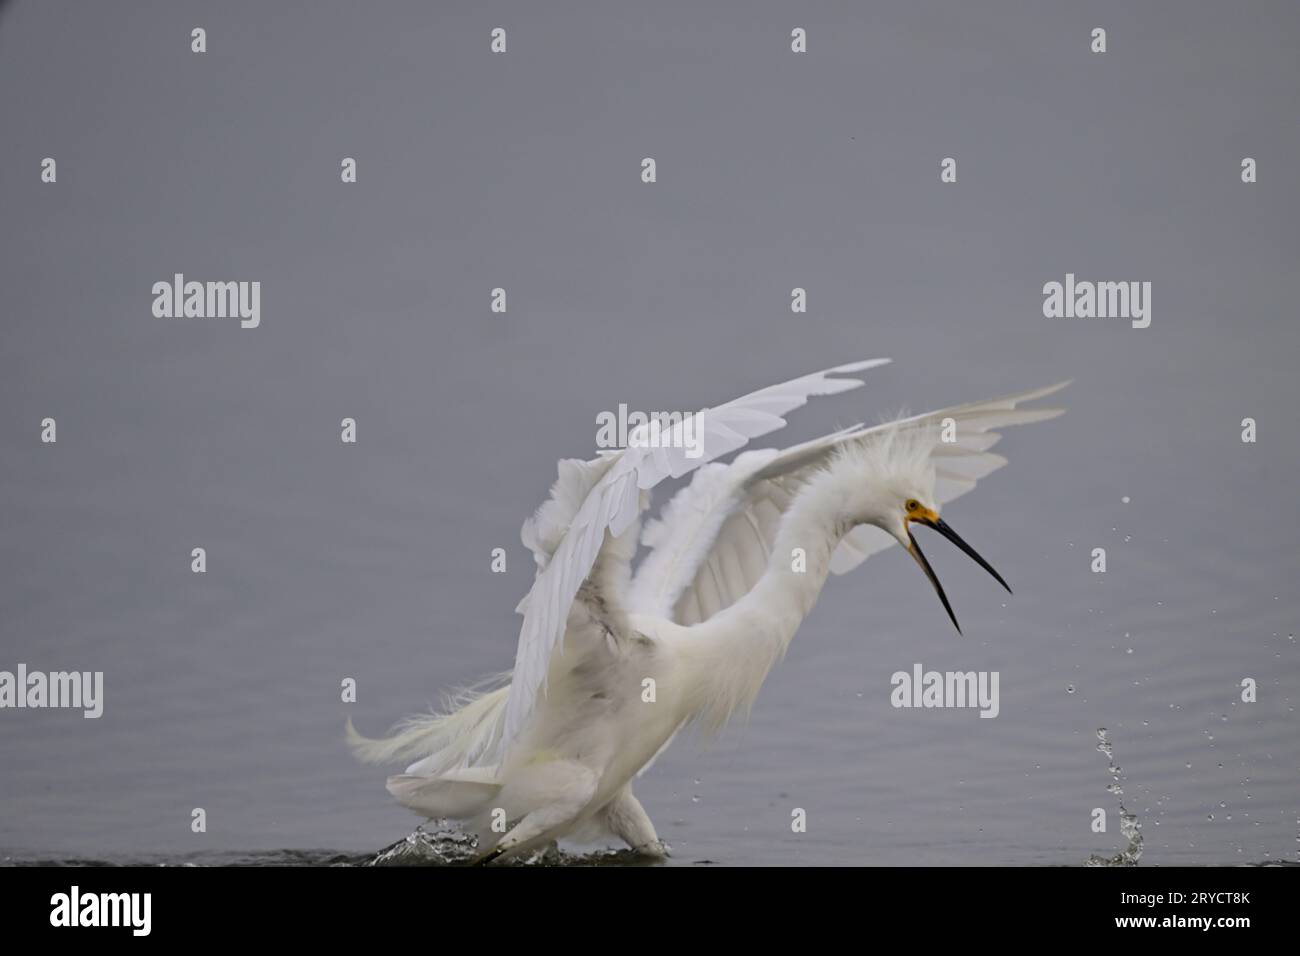 A Snowy Egret Preparing an attack on another Stock Photo